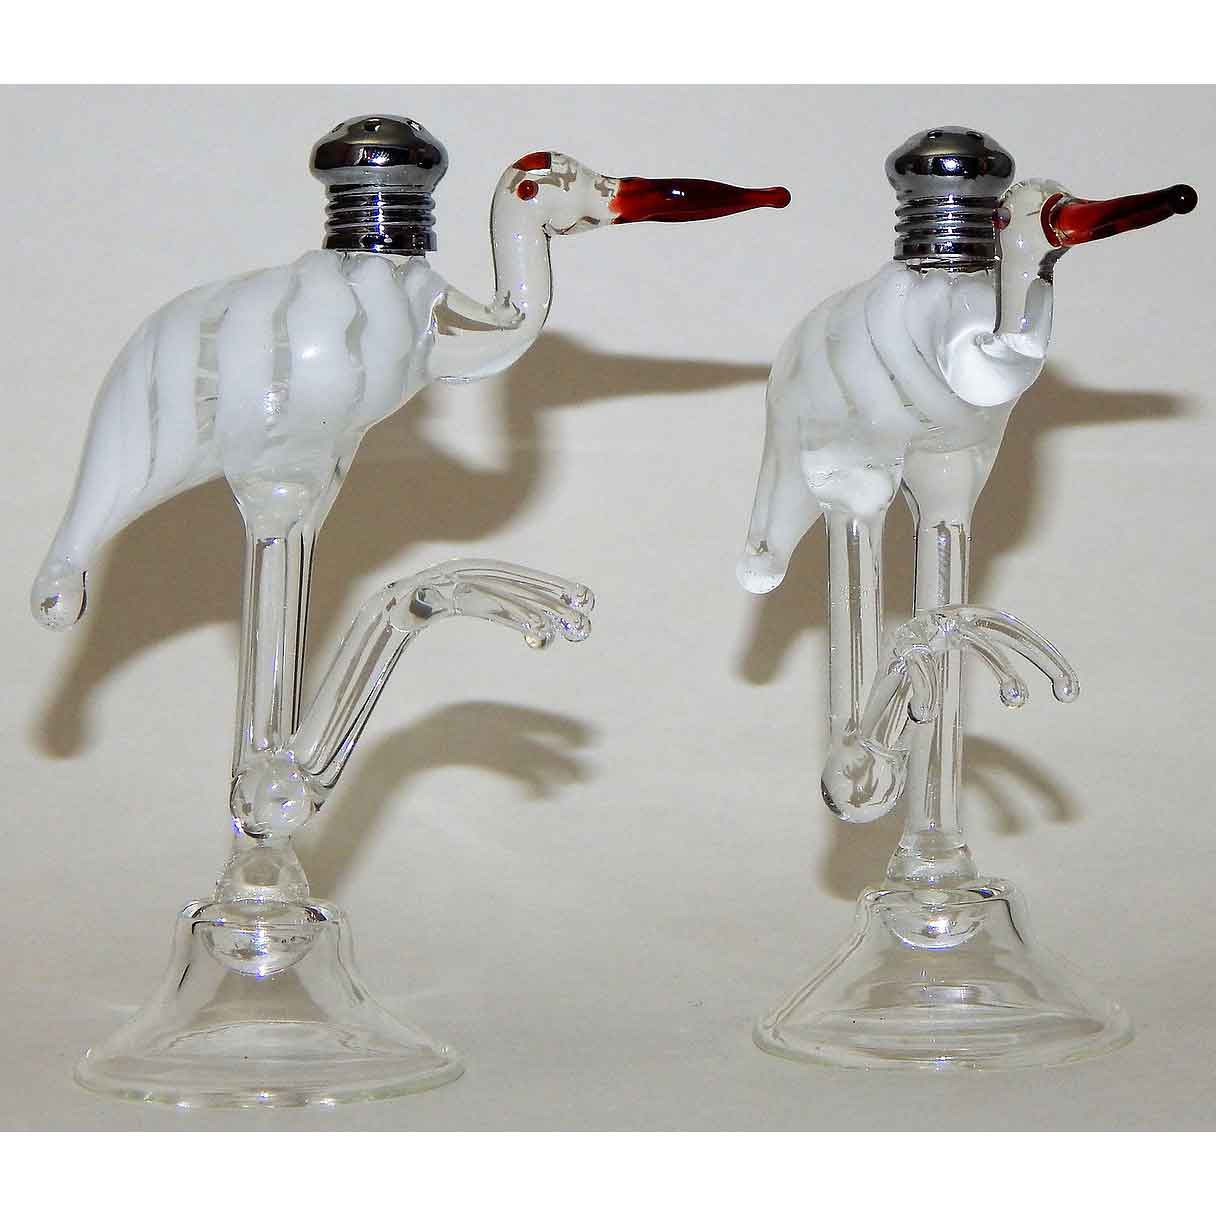 White Heron Blown Glass Salt and Pepper Shaker 108 by Four Sisters Art Glass